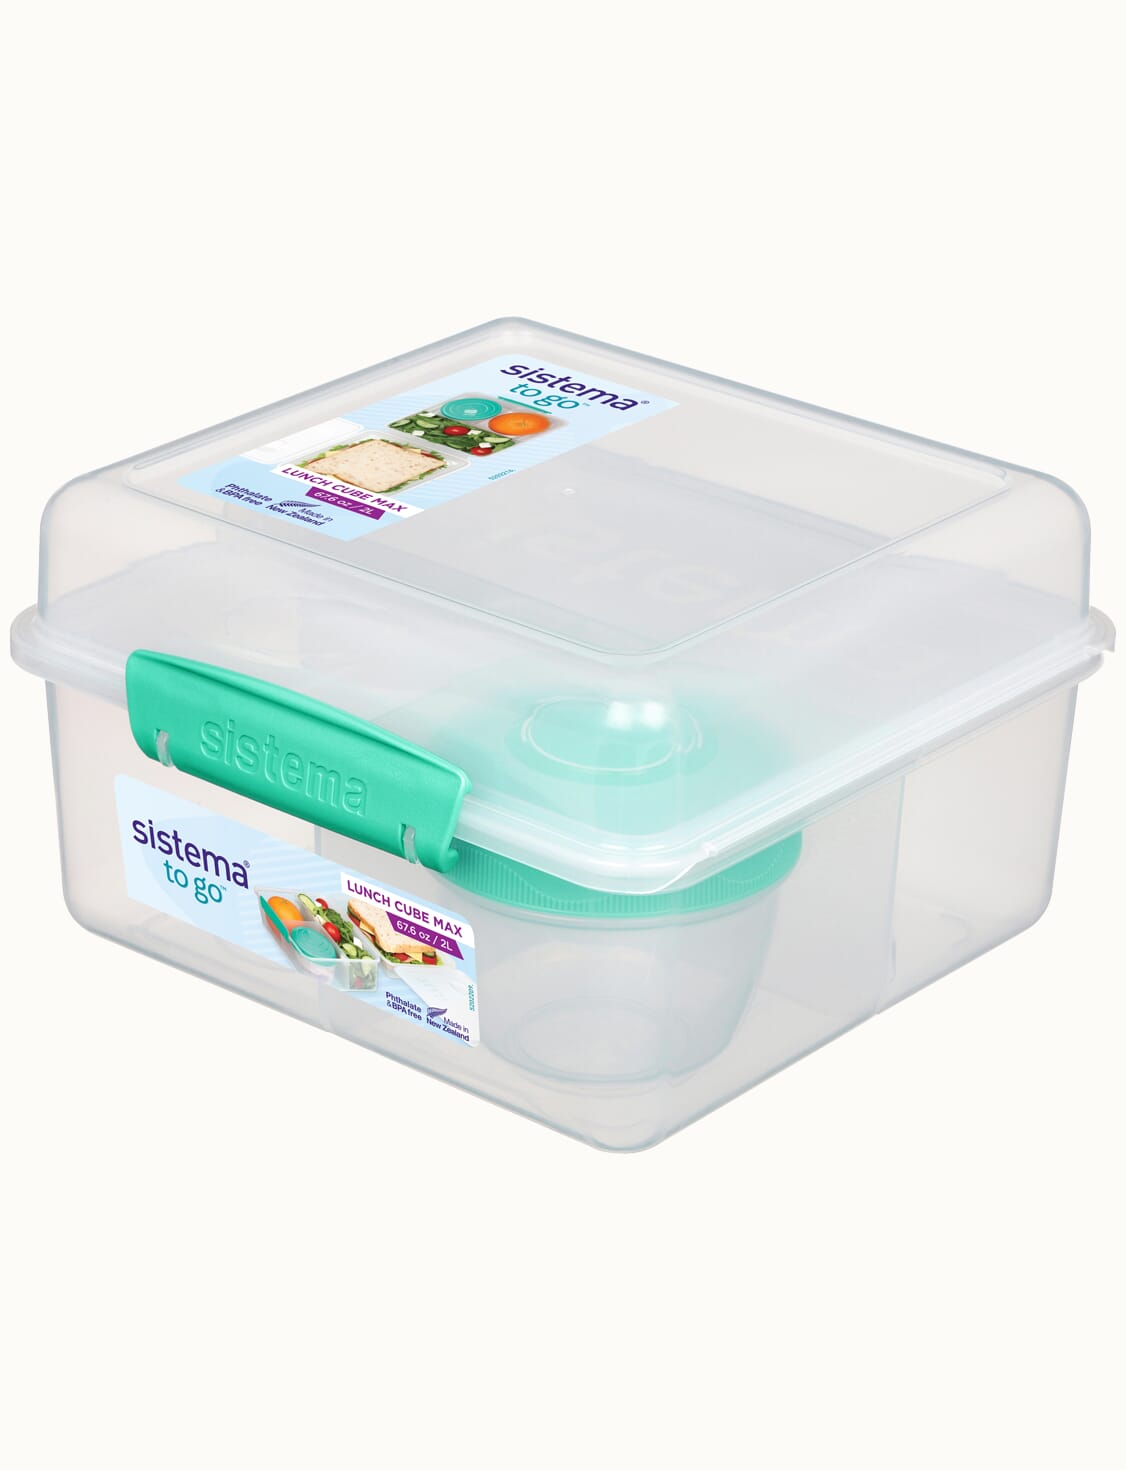 2L Lunch Cube Max TO GO™ with Yogurt Pot-Minty Teal